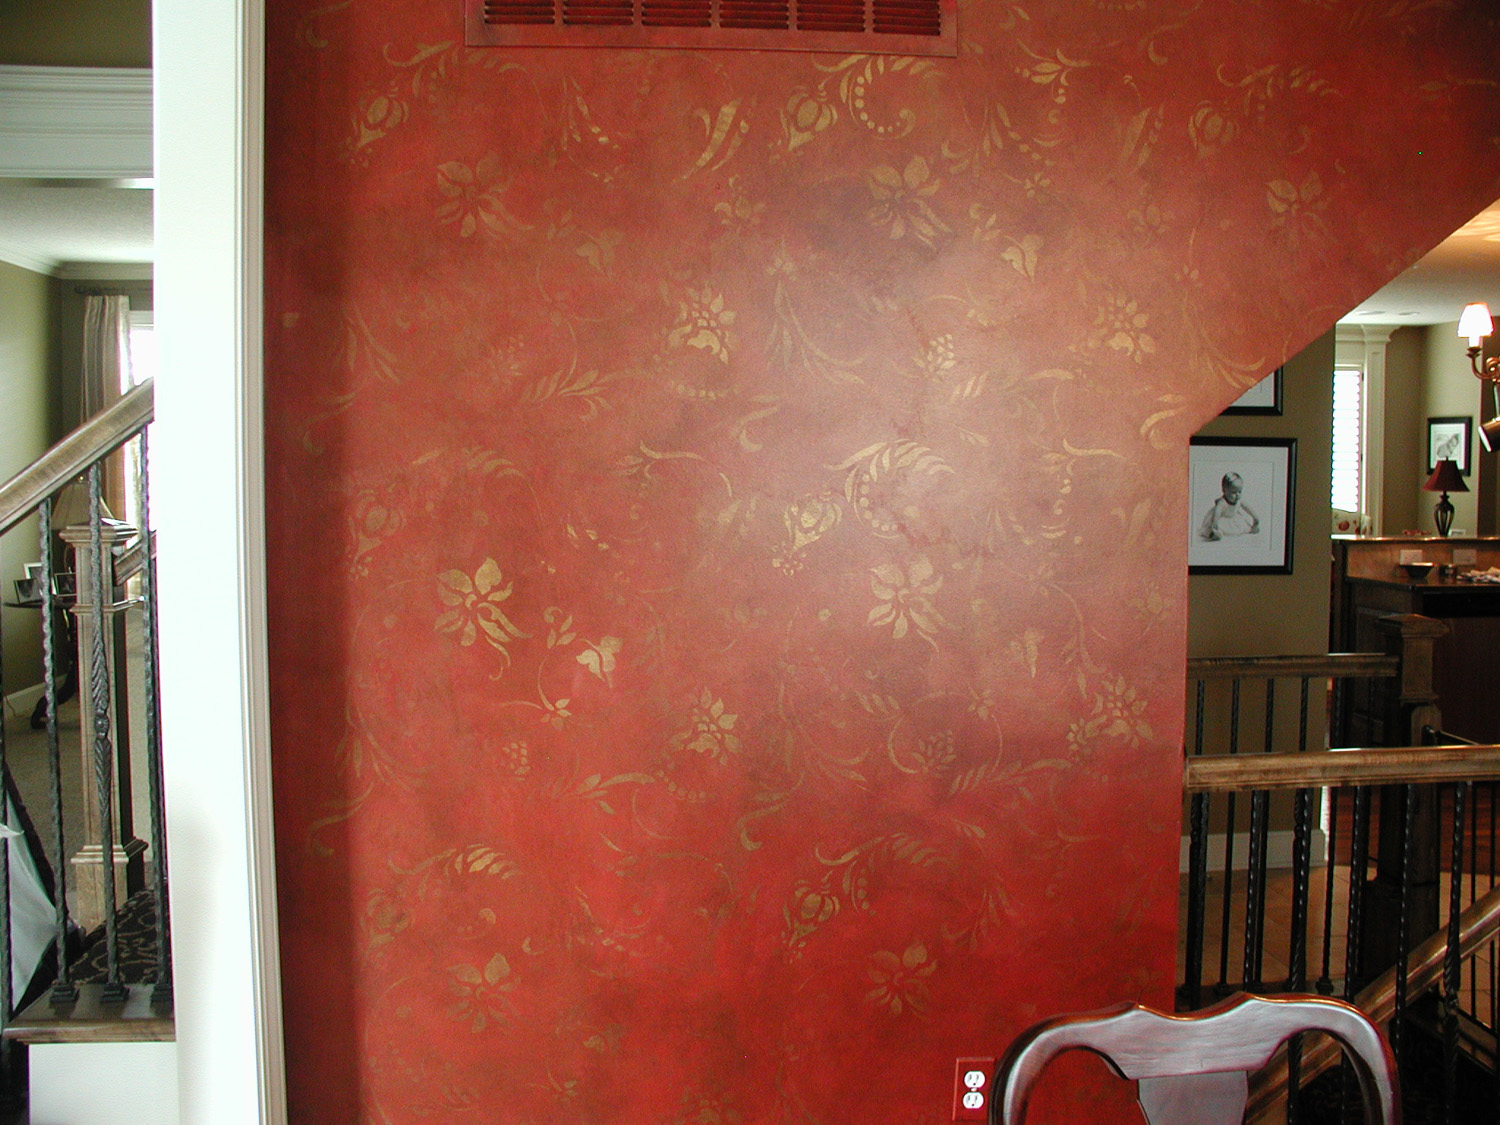 Fresco Over Red Veian Plaster With Bronze Stain Wallpaper Stencil